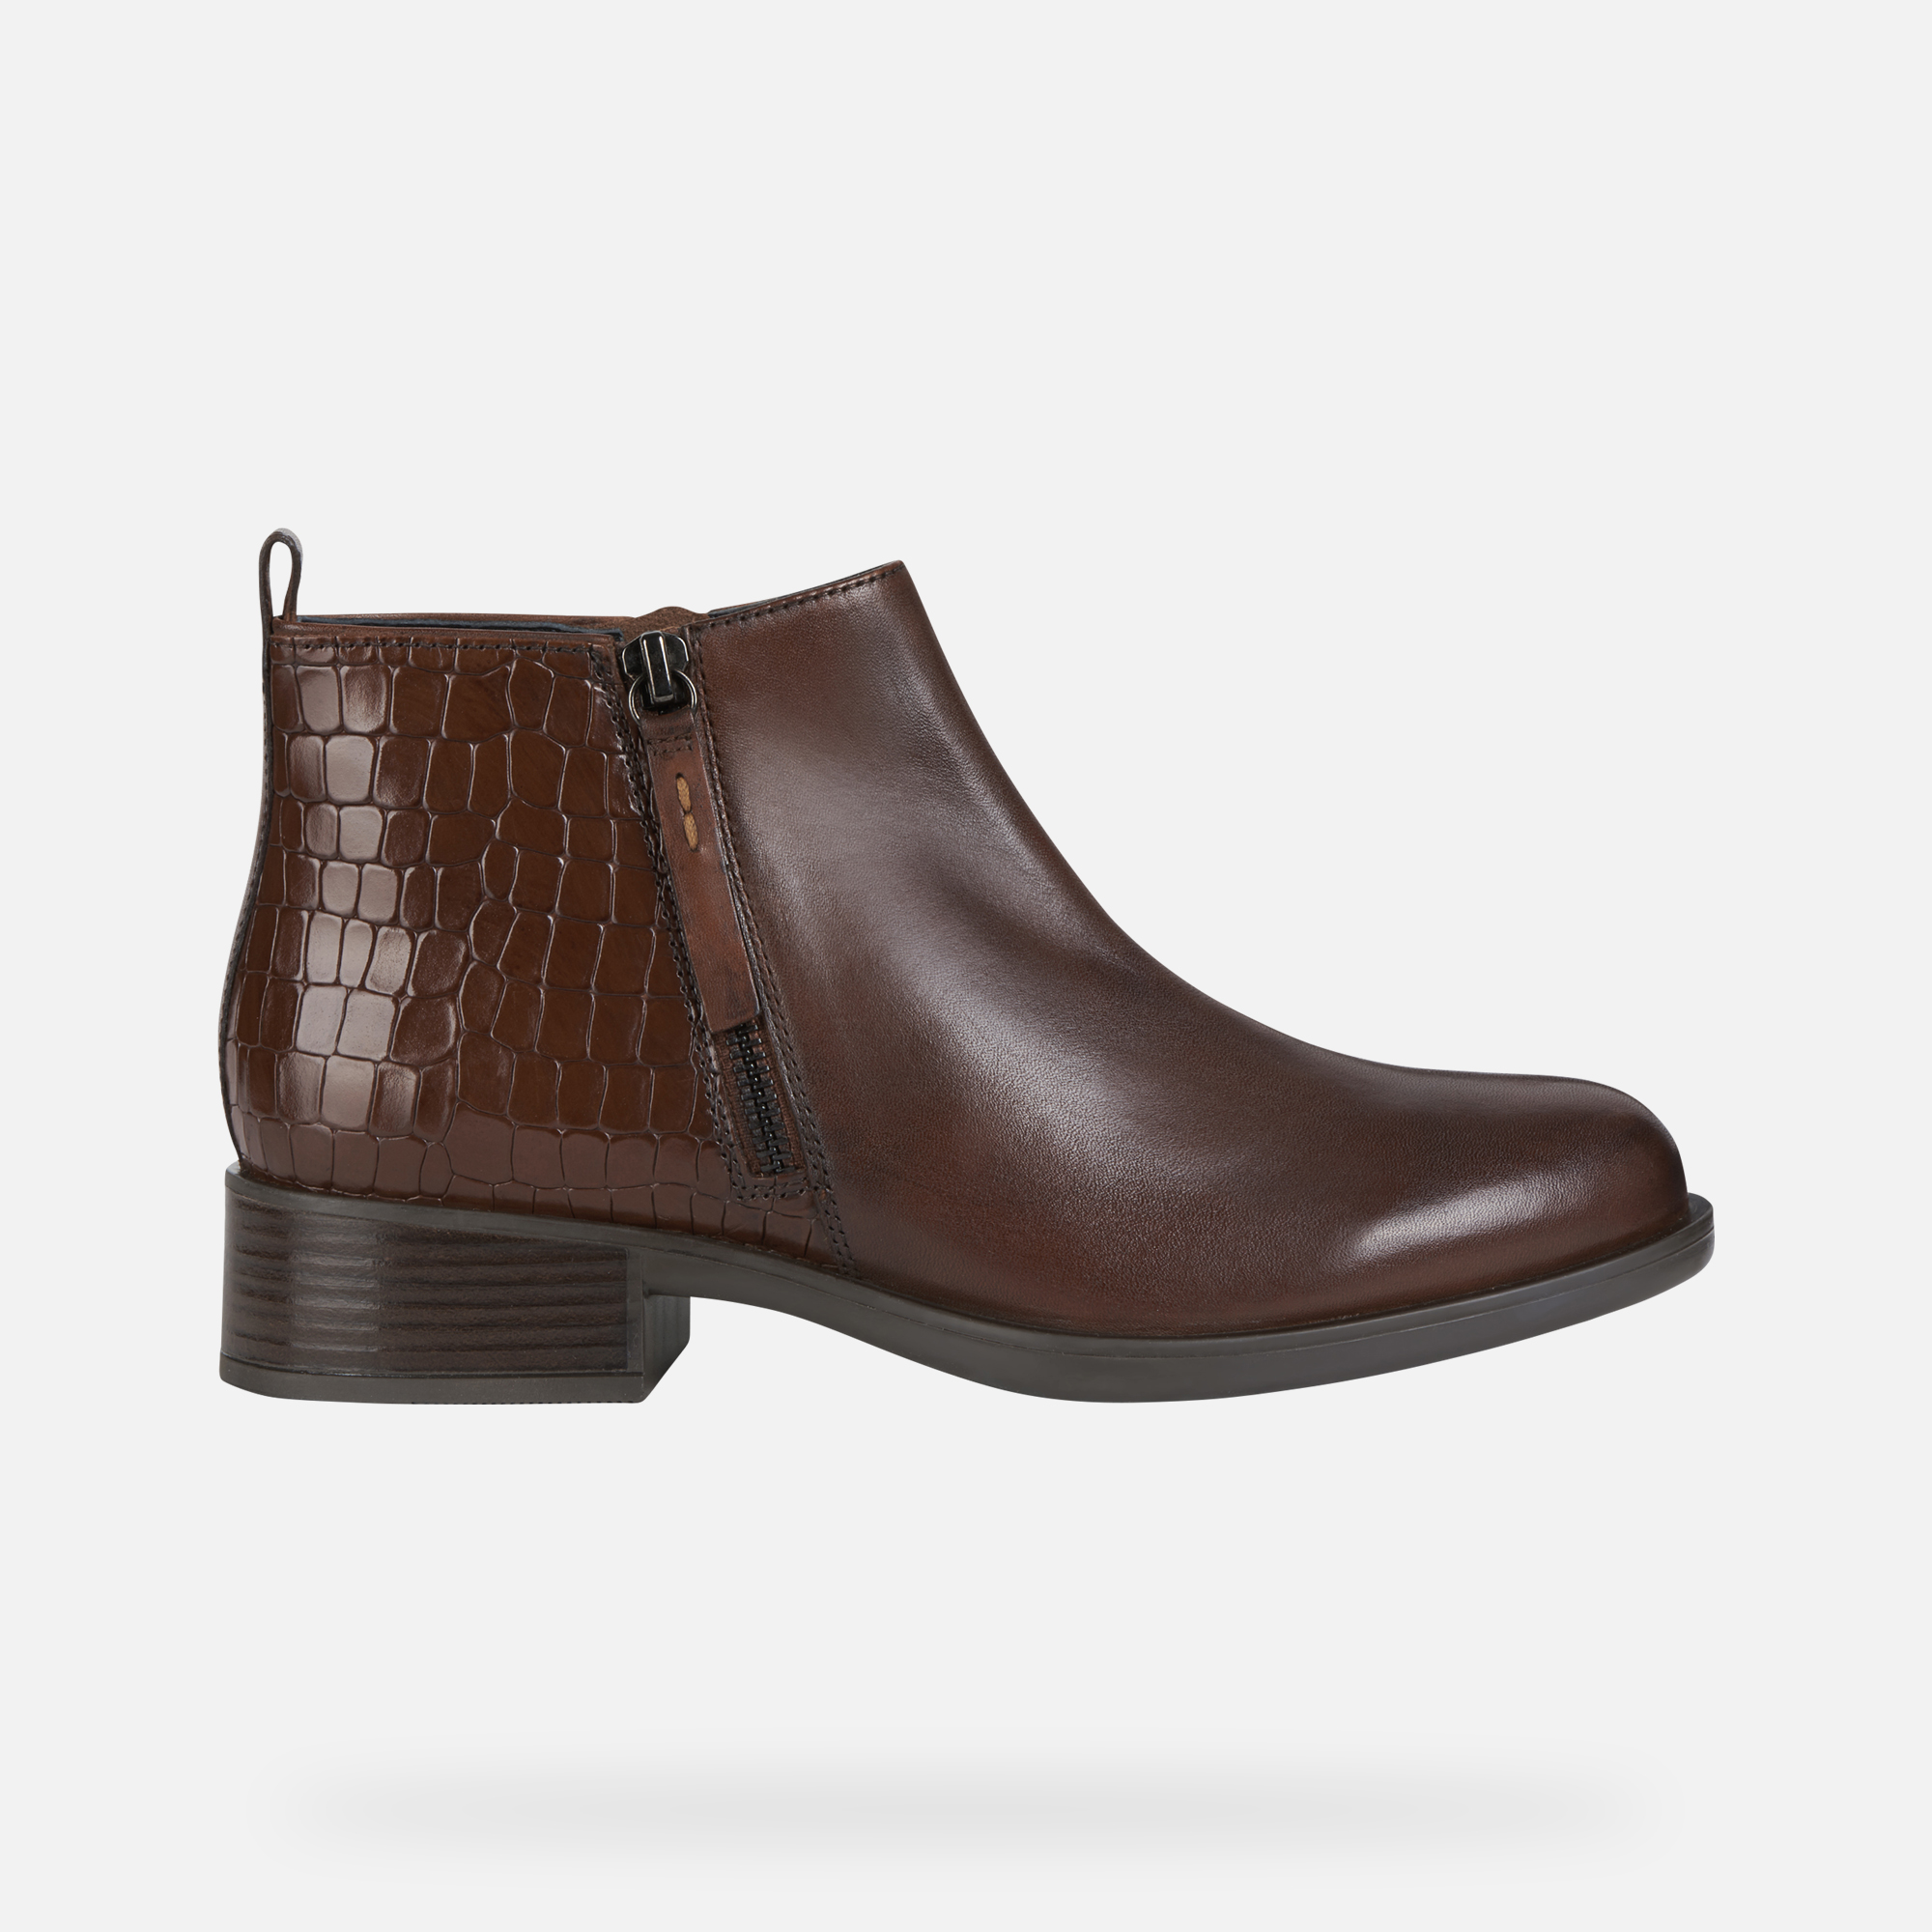 Geox RESIA Woman: Chestnut Ankle Boots | FW20 Geox®